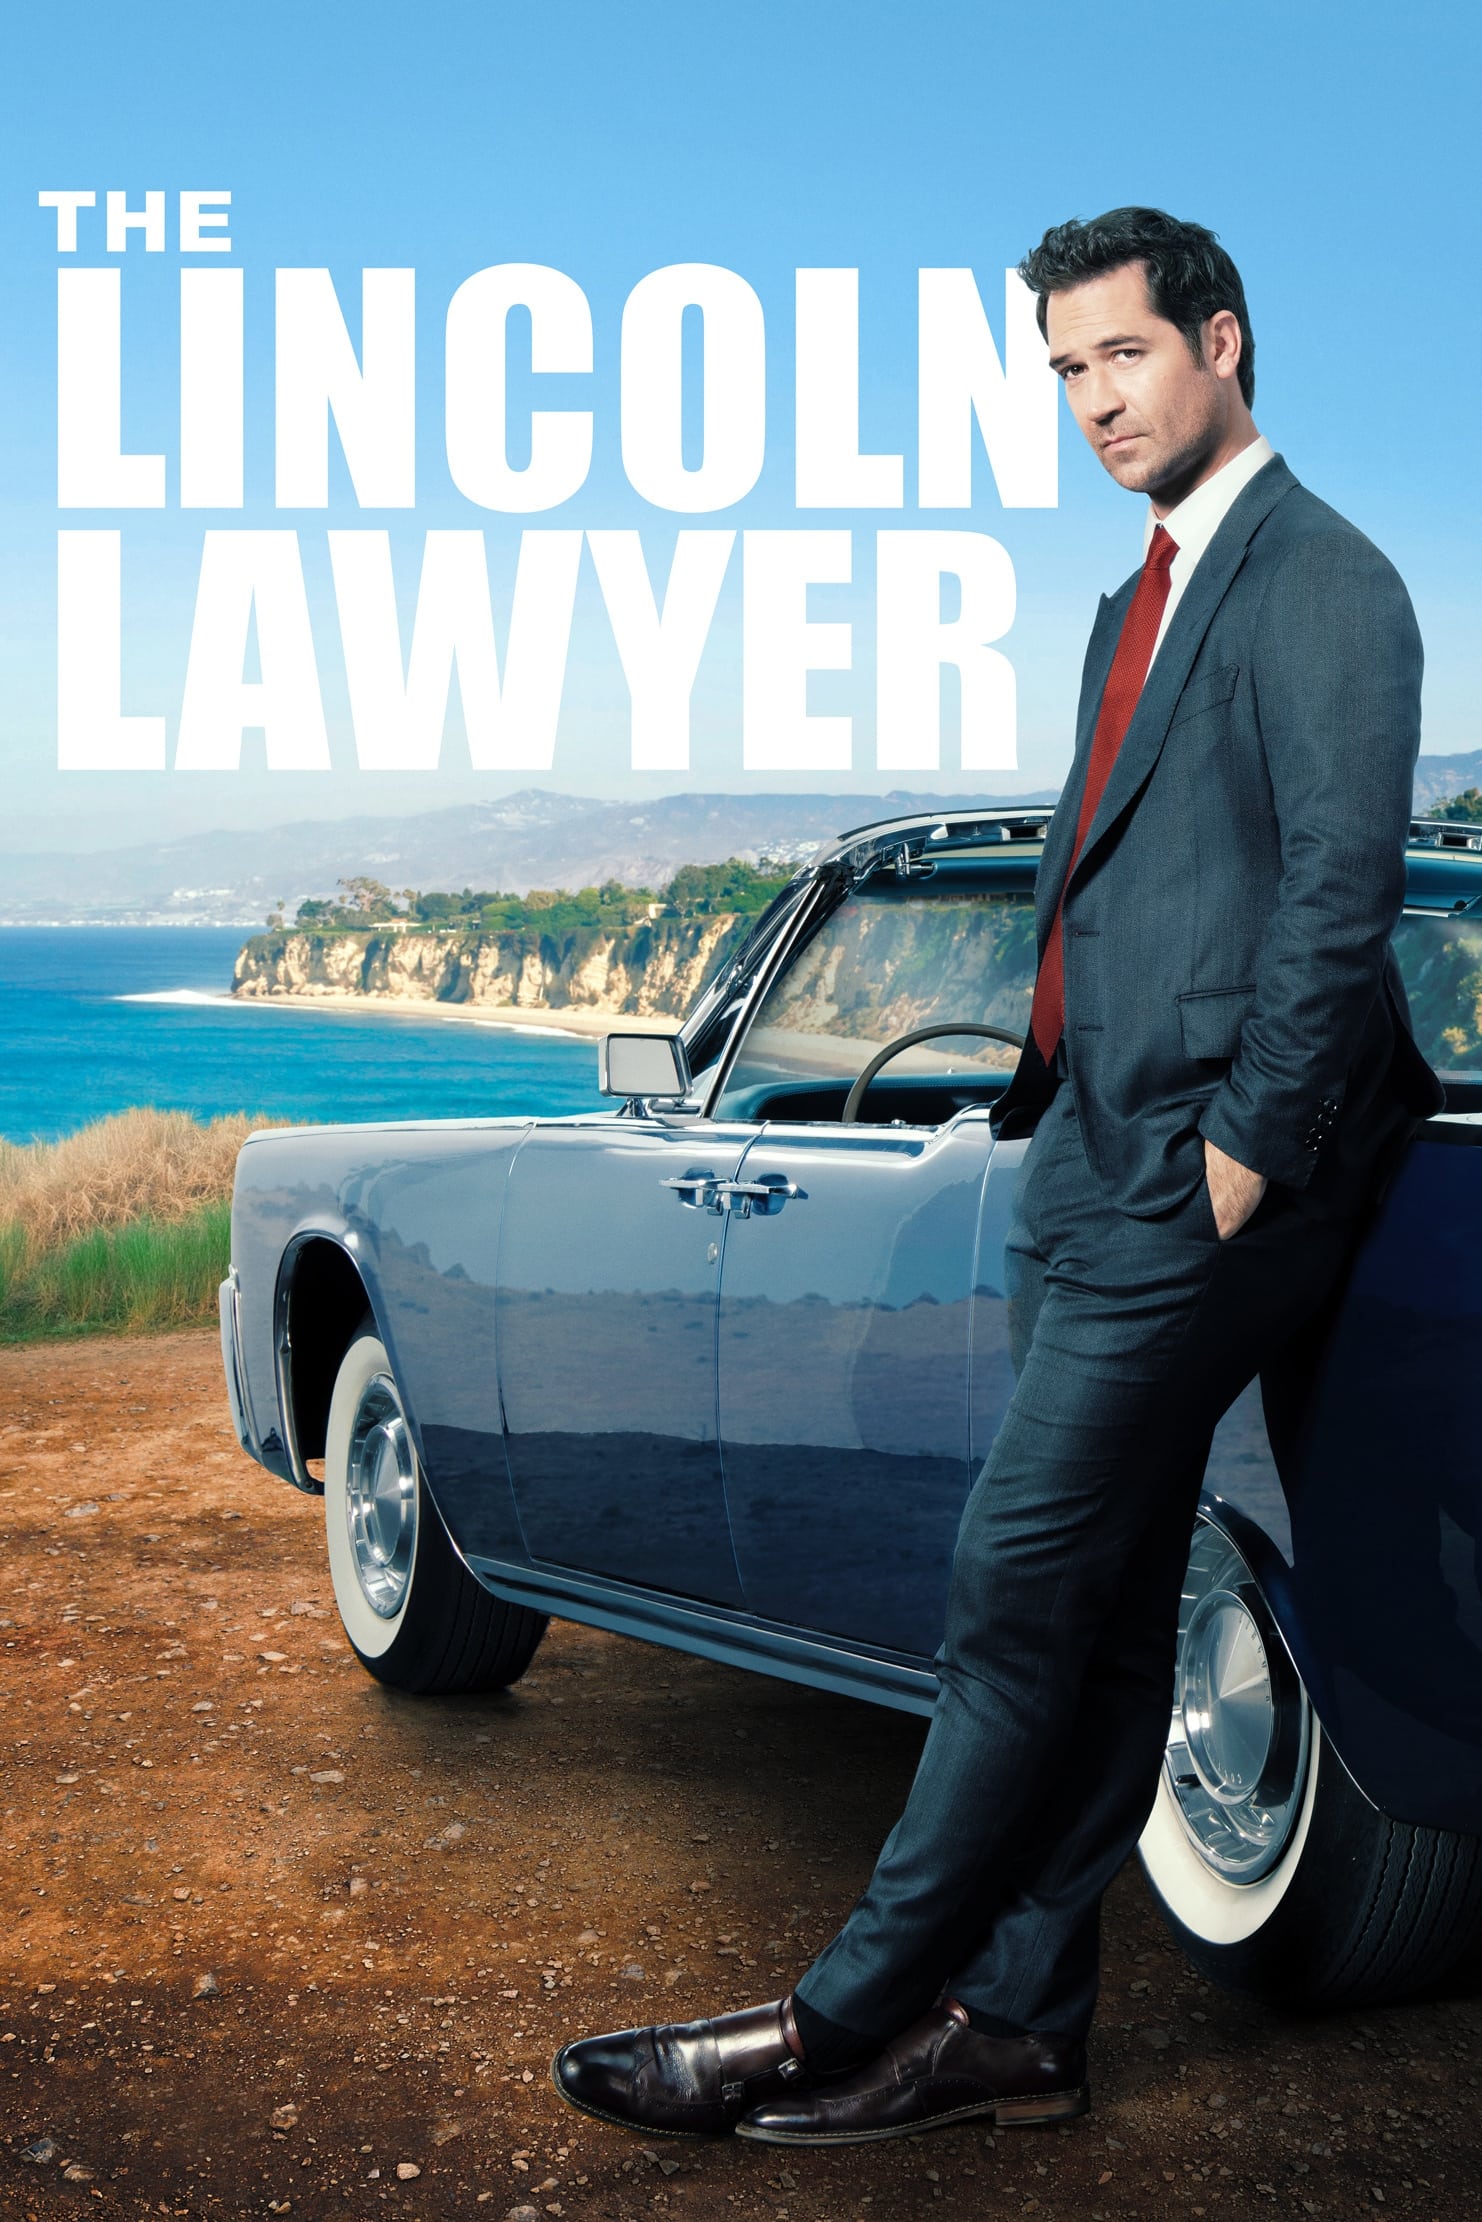 The Lincoln Lawyer TV Shows About Courtroom Drama